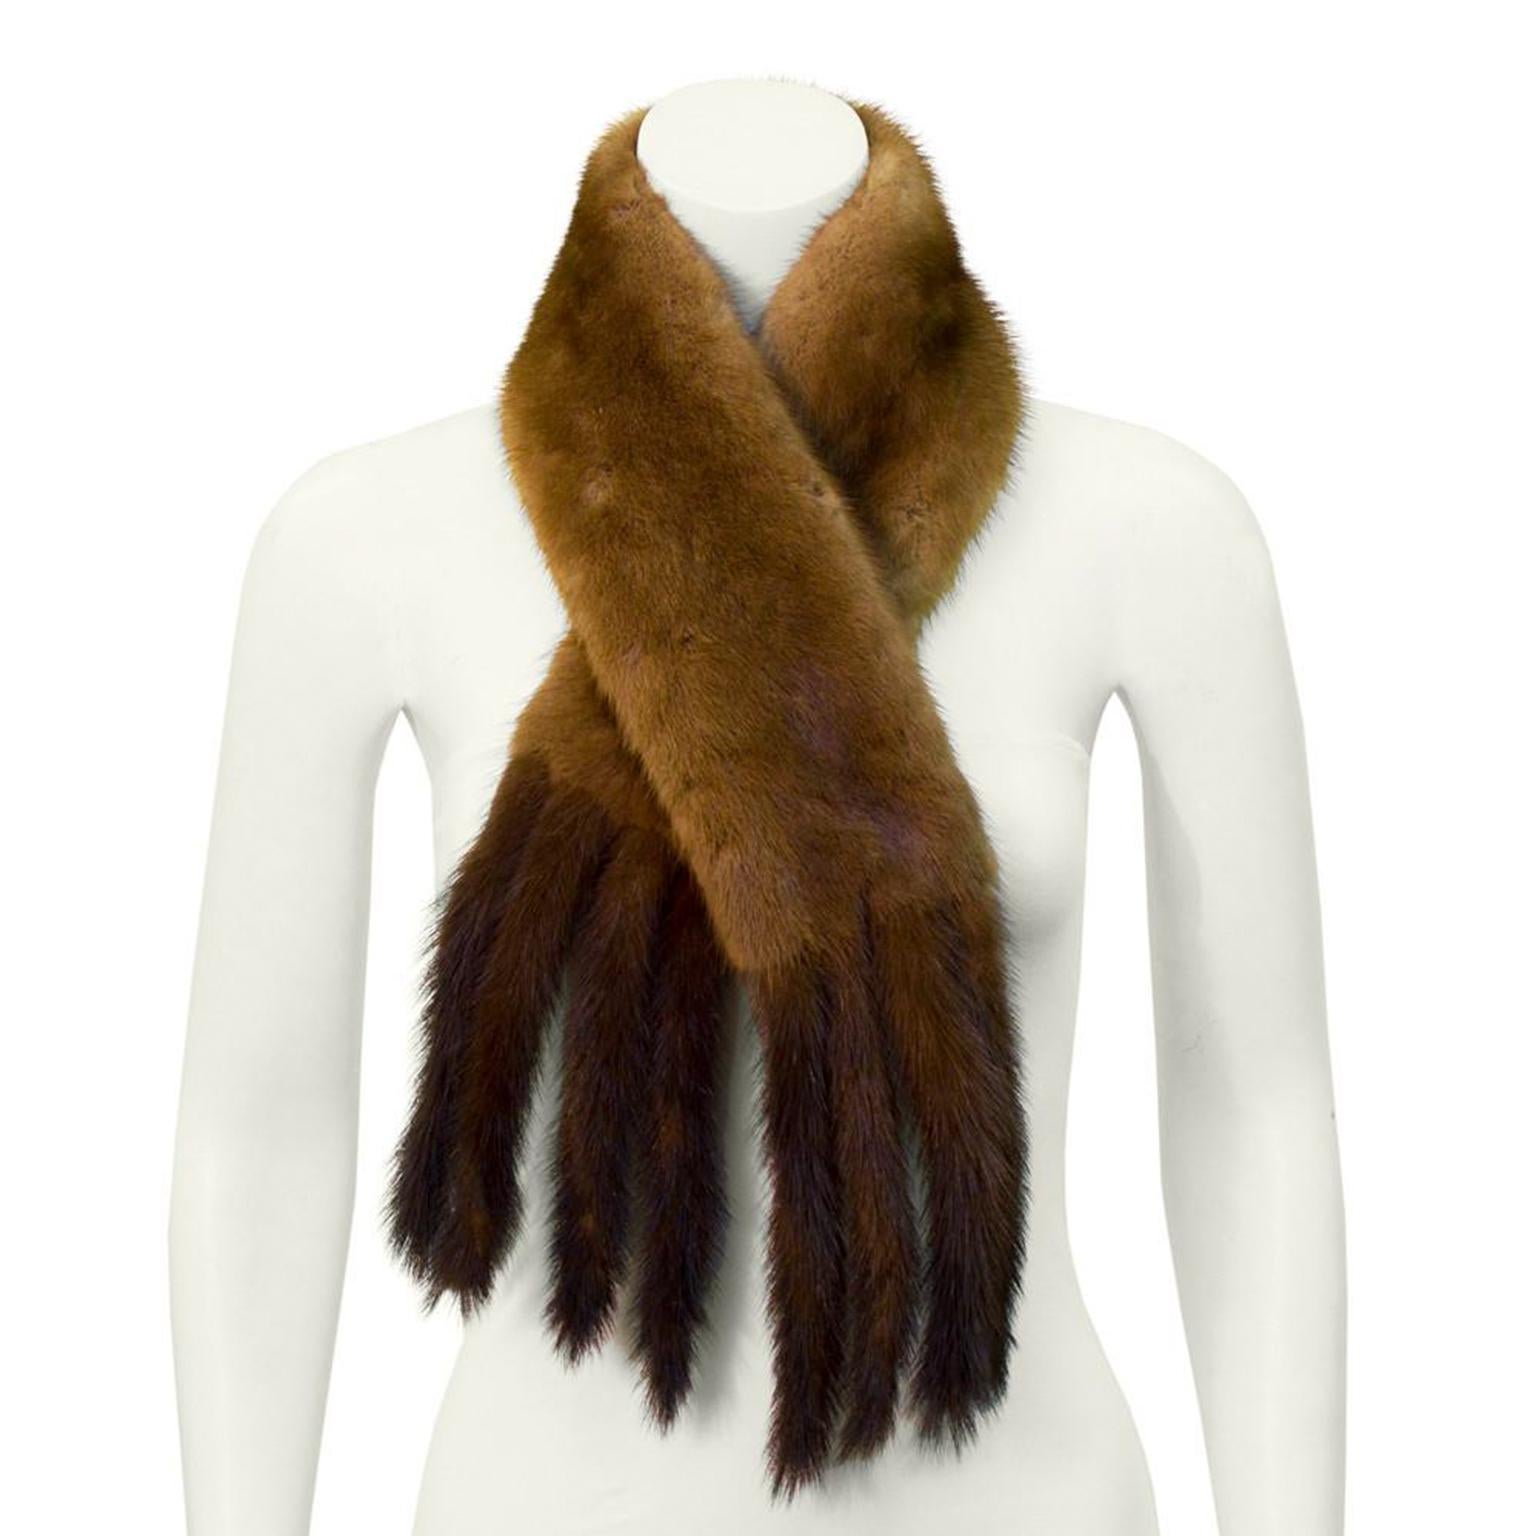 Early 1960's brown mink Christian Dior Paris scarf. Rectangular in shape and trimmed with eight mink tails. Timeless piece in excellent vintage condition.